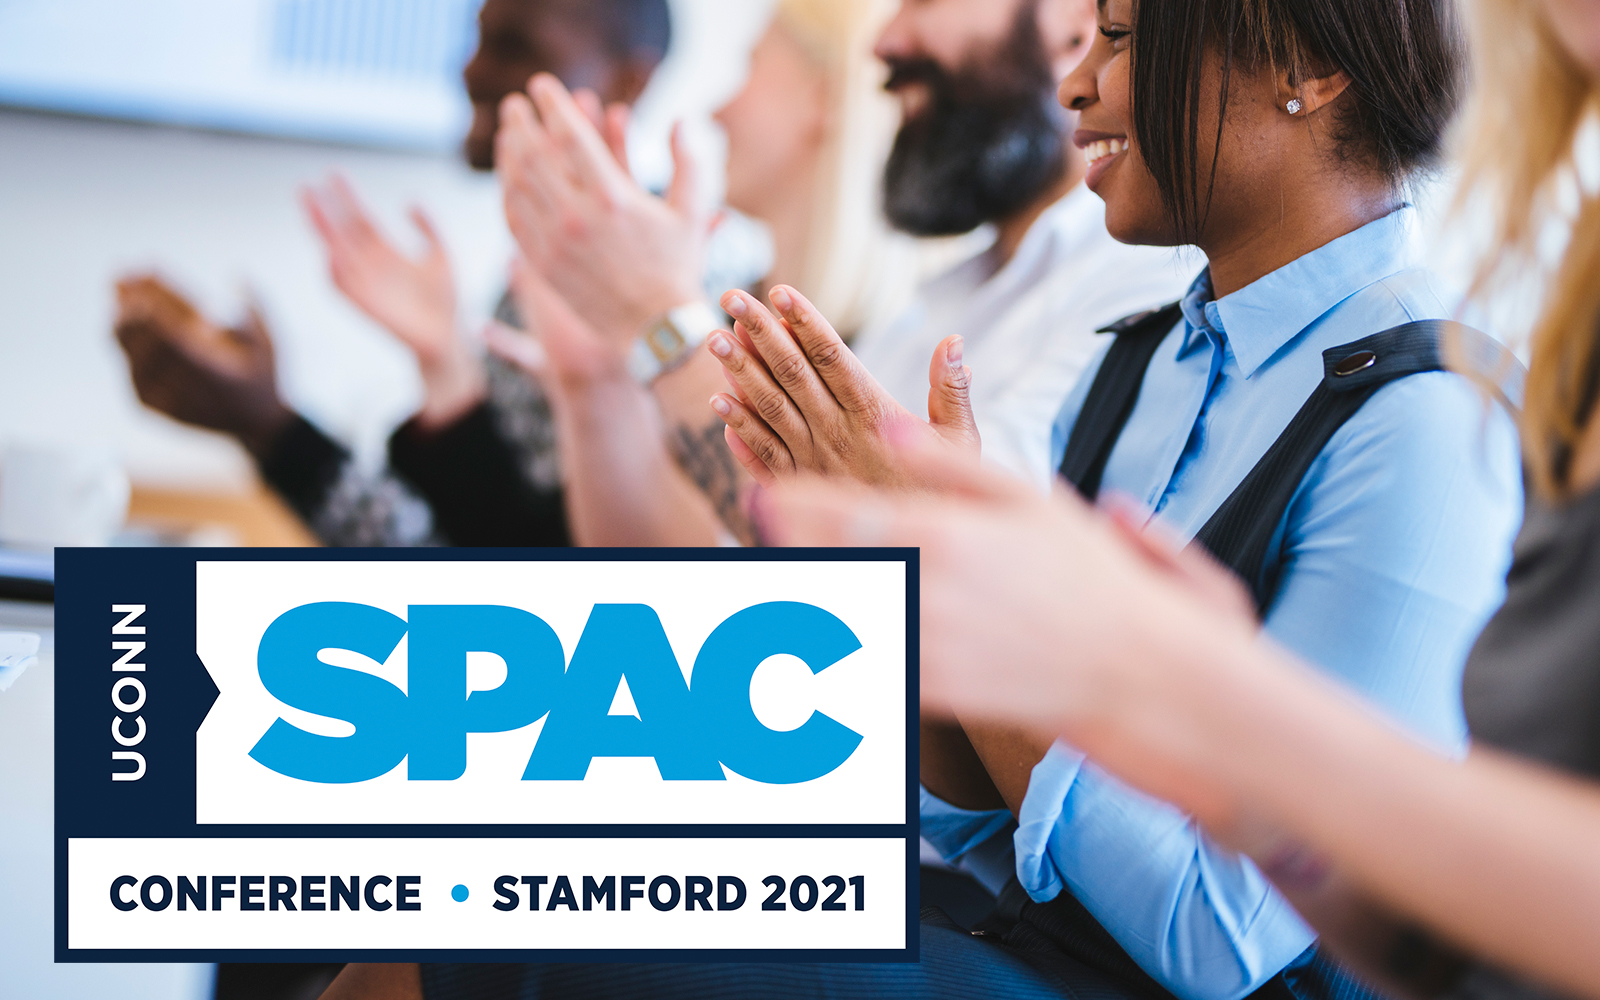 IMage of conference attendees applauding, SPAC conference logo is inset. 